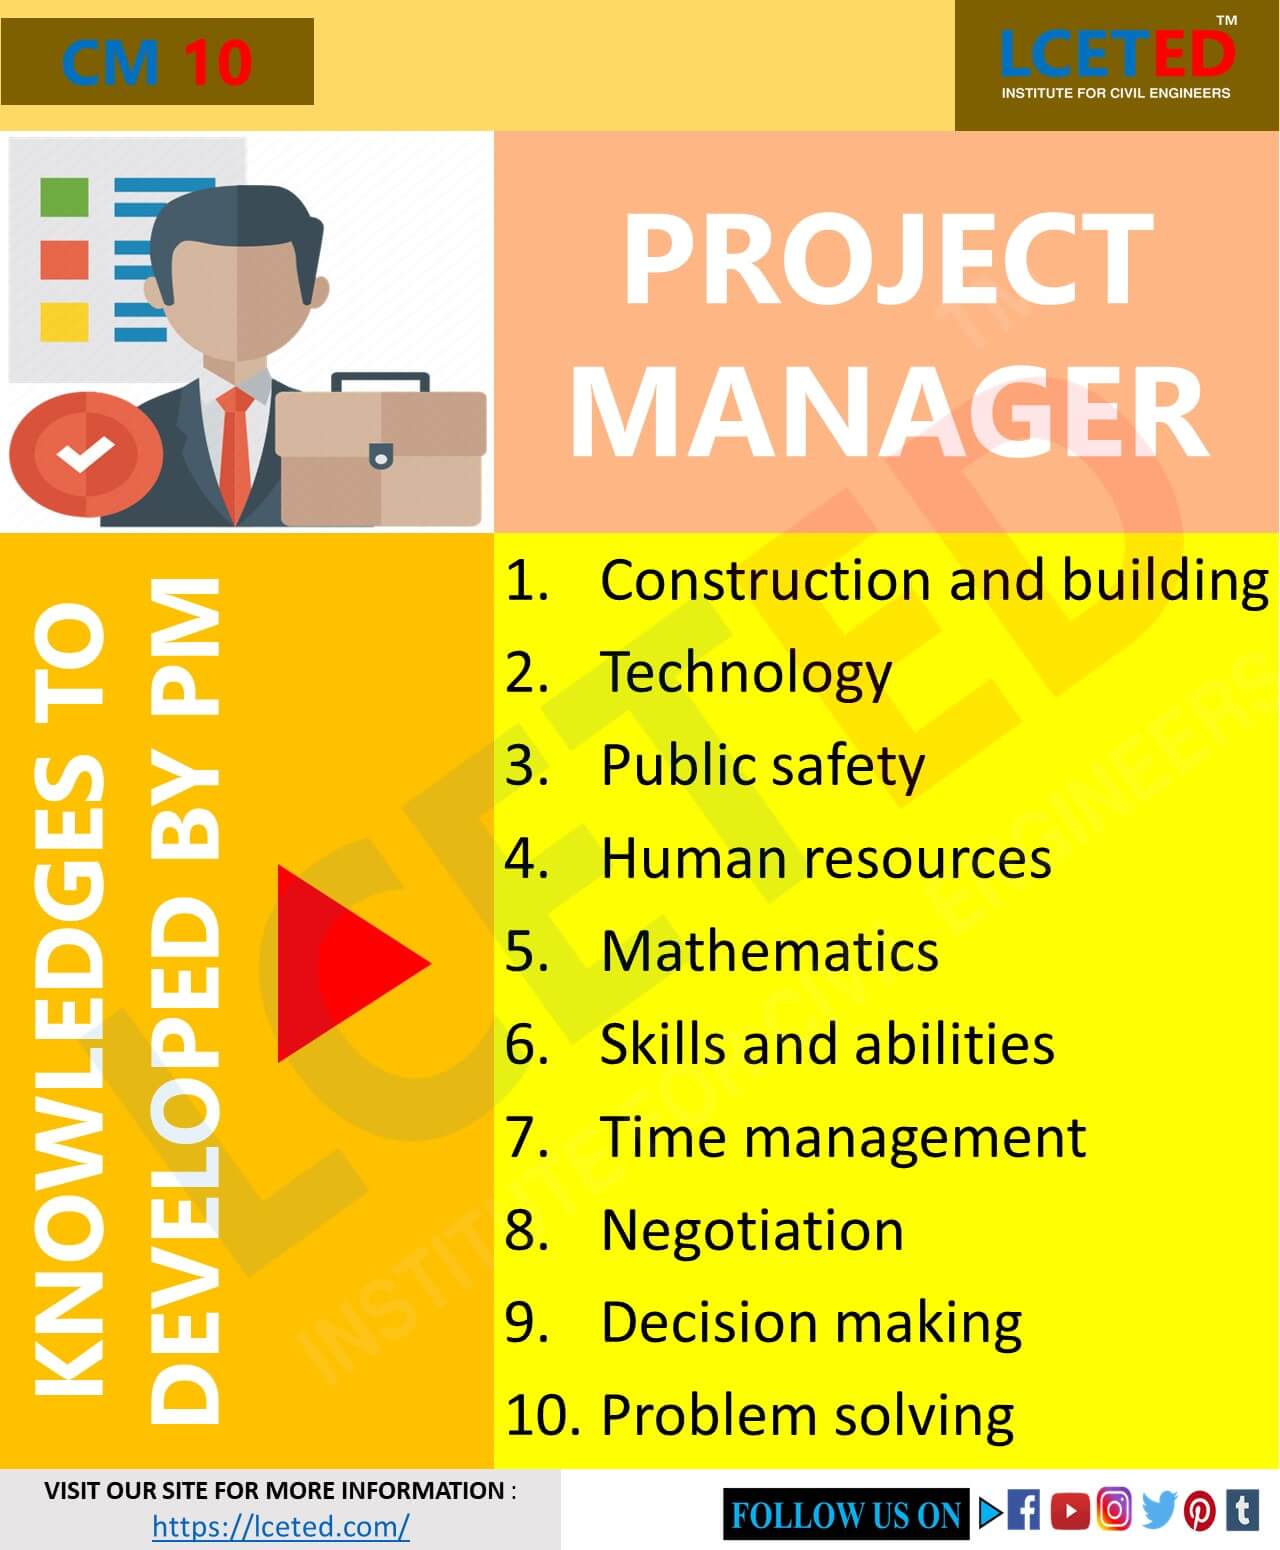 skills-to-develop-by-project-manager-construction-management-lceted-lceted-institute-for